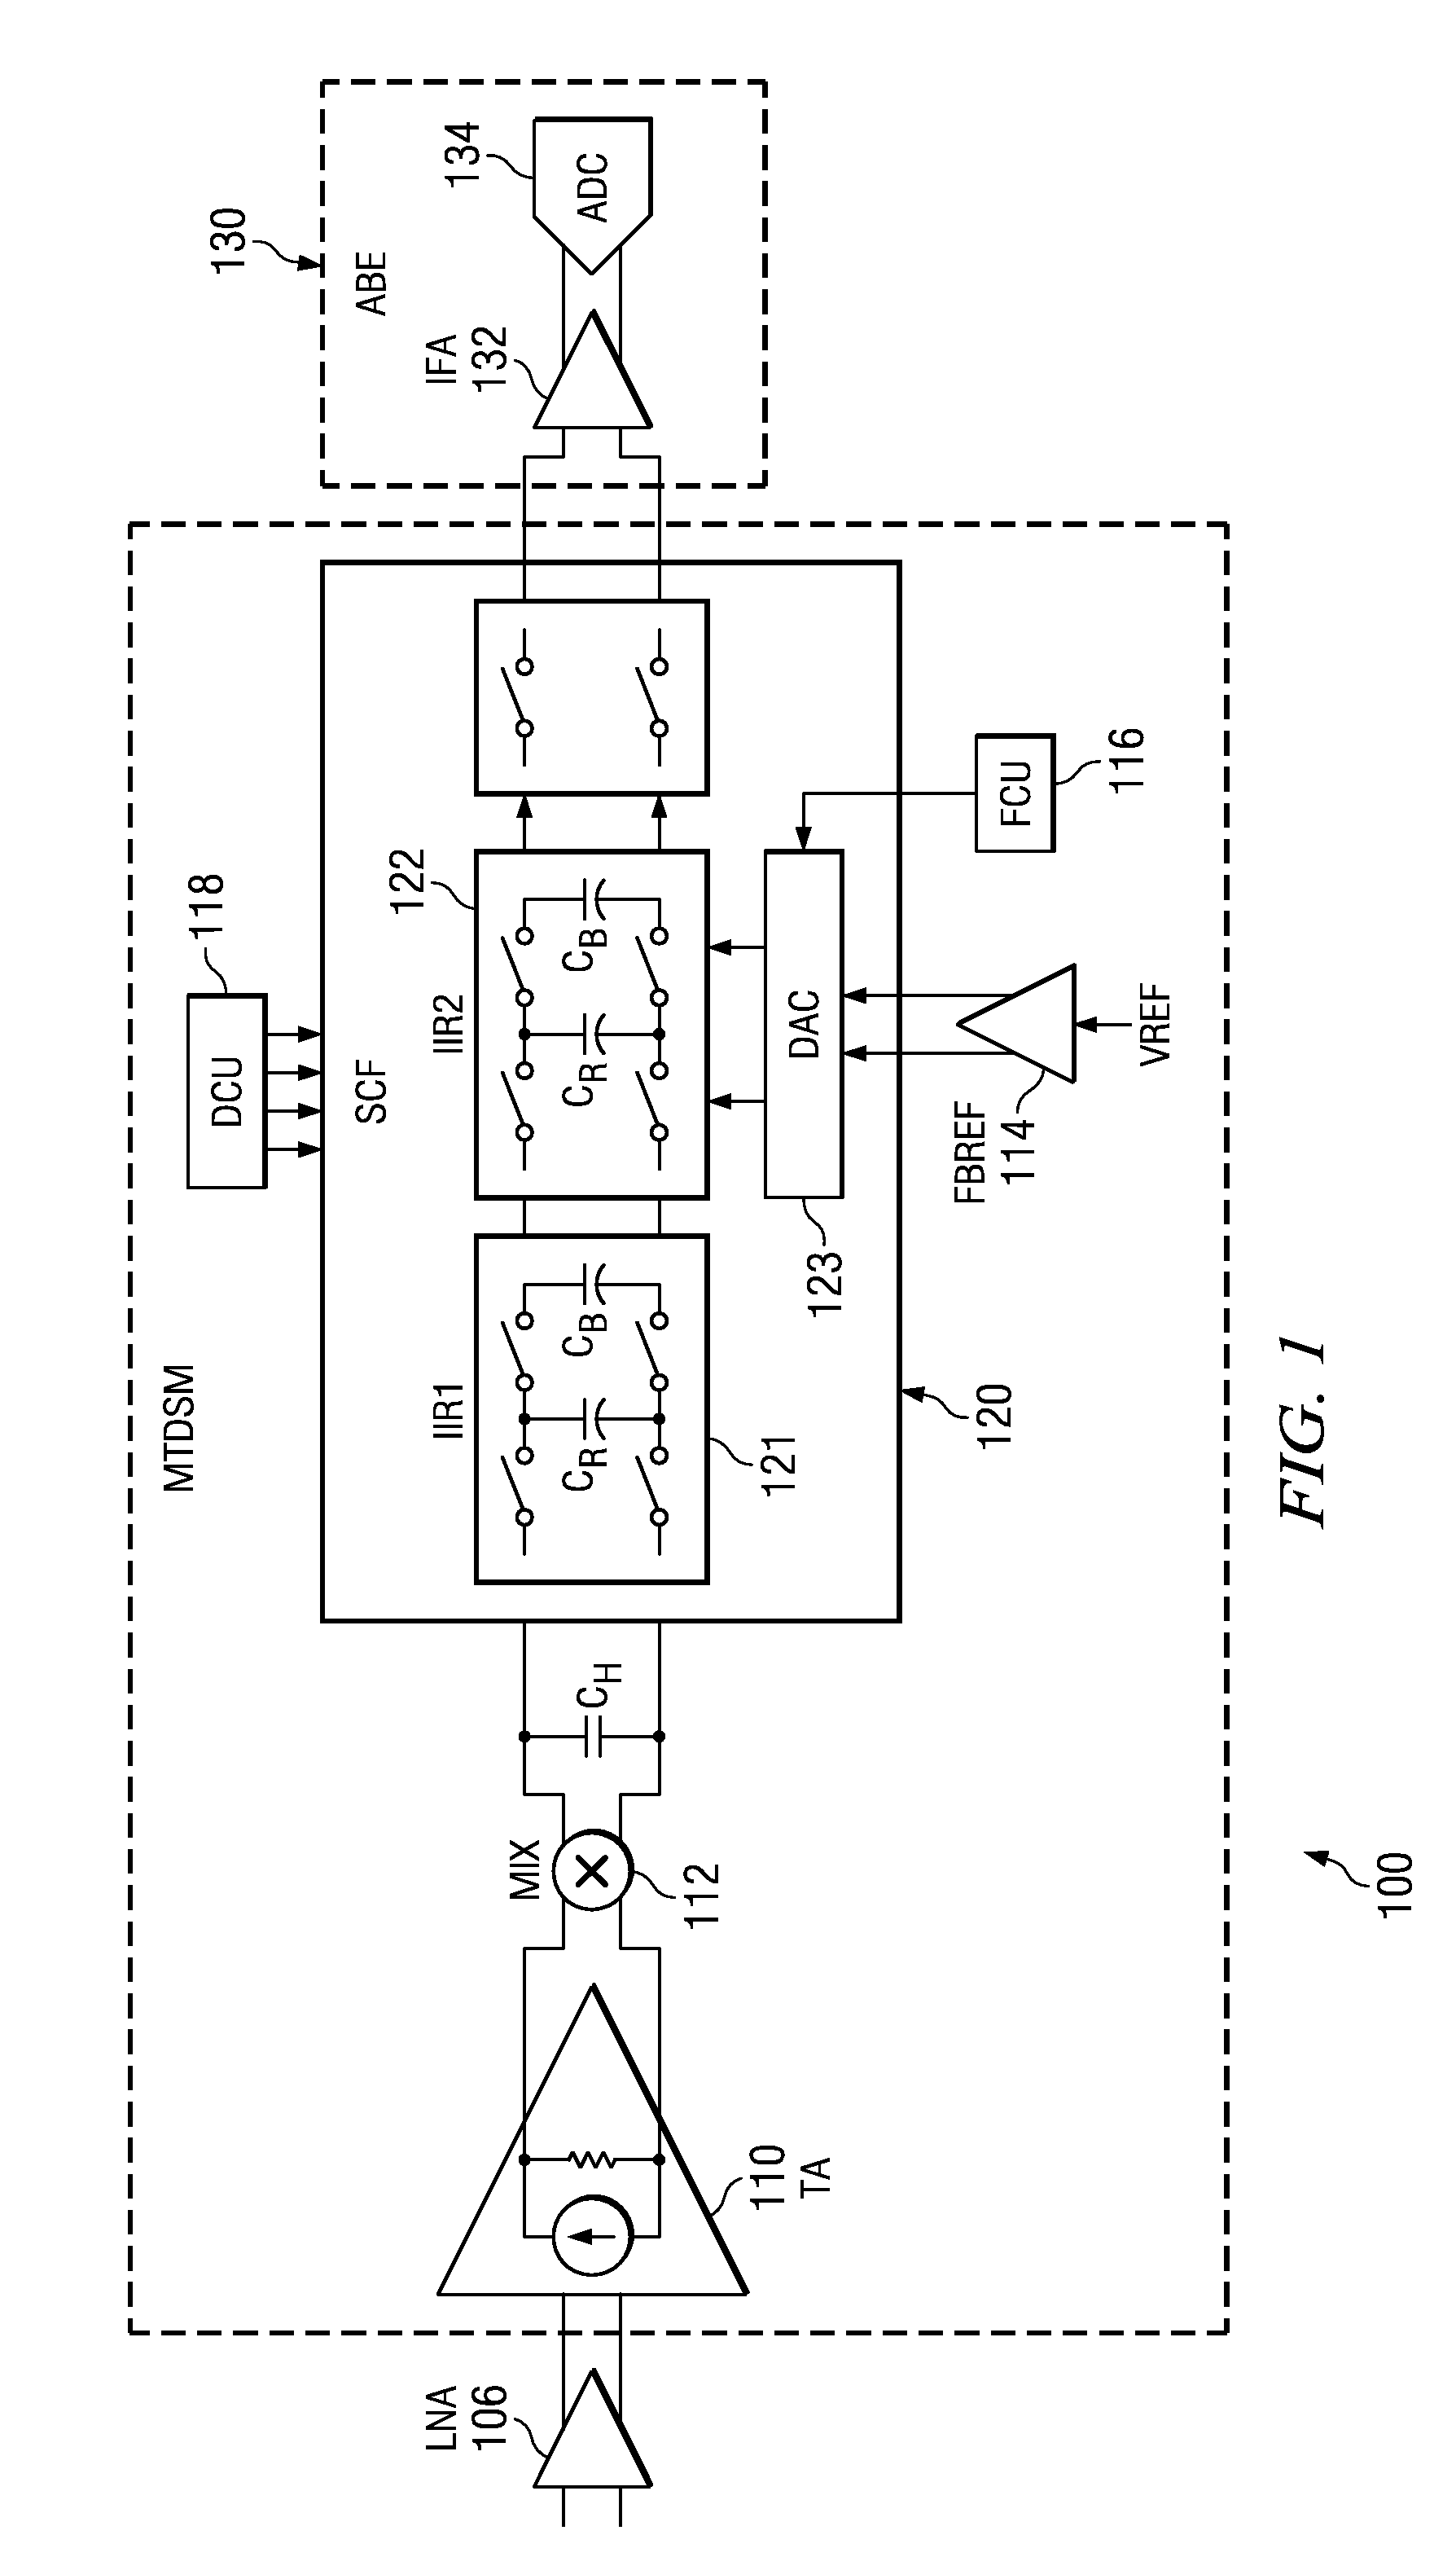 Multi-Tap Direct Sub-sampling Mixing System for Wireless Receivers